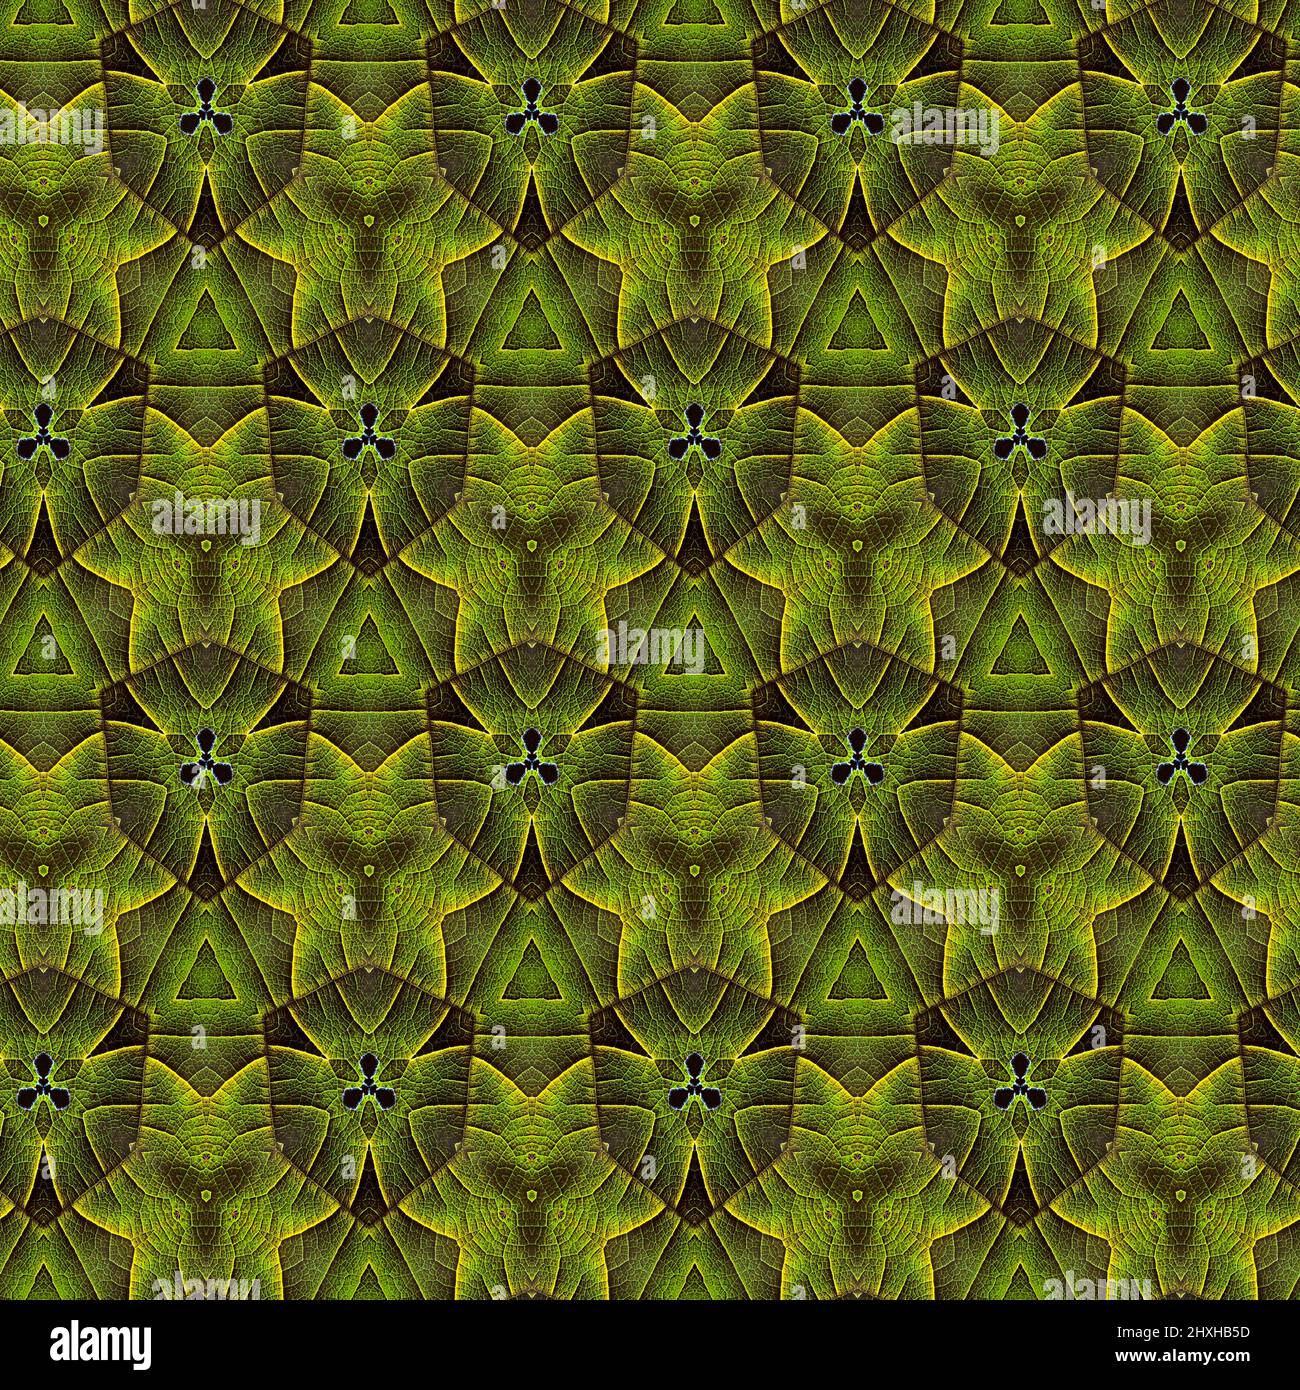 Interesting shapes create a beautiful, symmetrical design pattern that can be tiled seamlessly Stock Photo